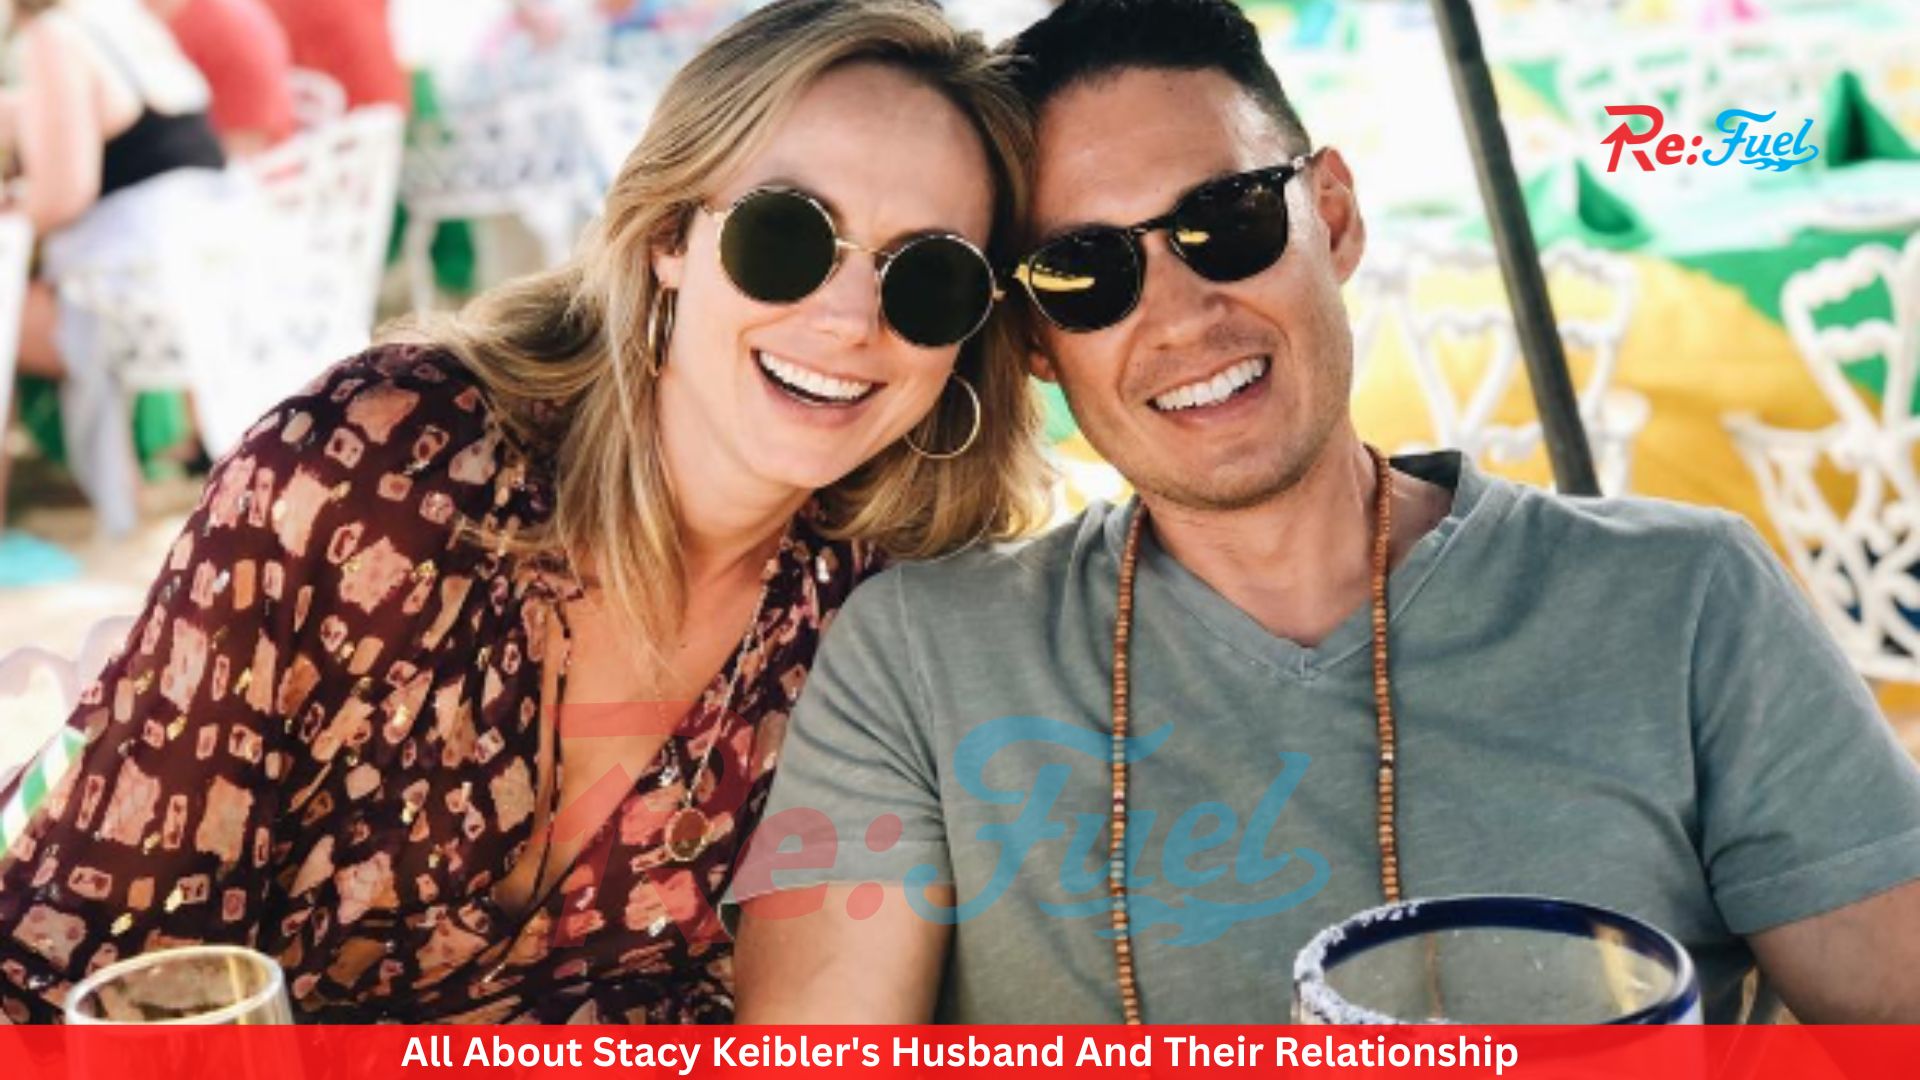 All About Stacy Keibler's Husband And Their Relationship